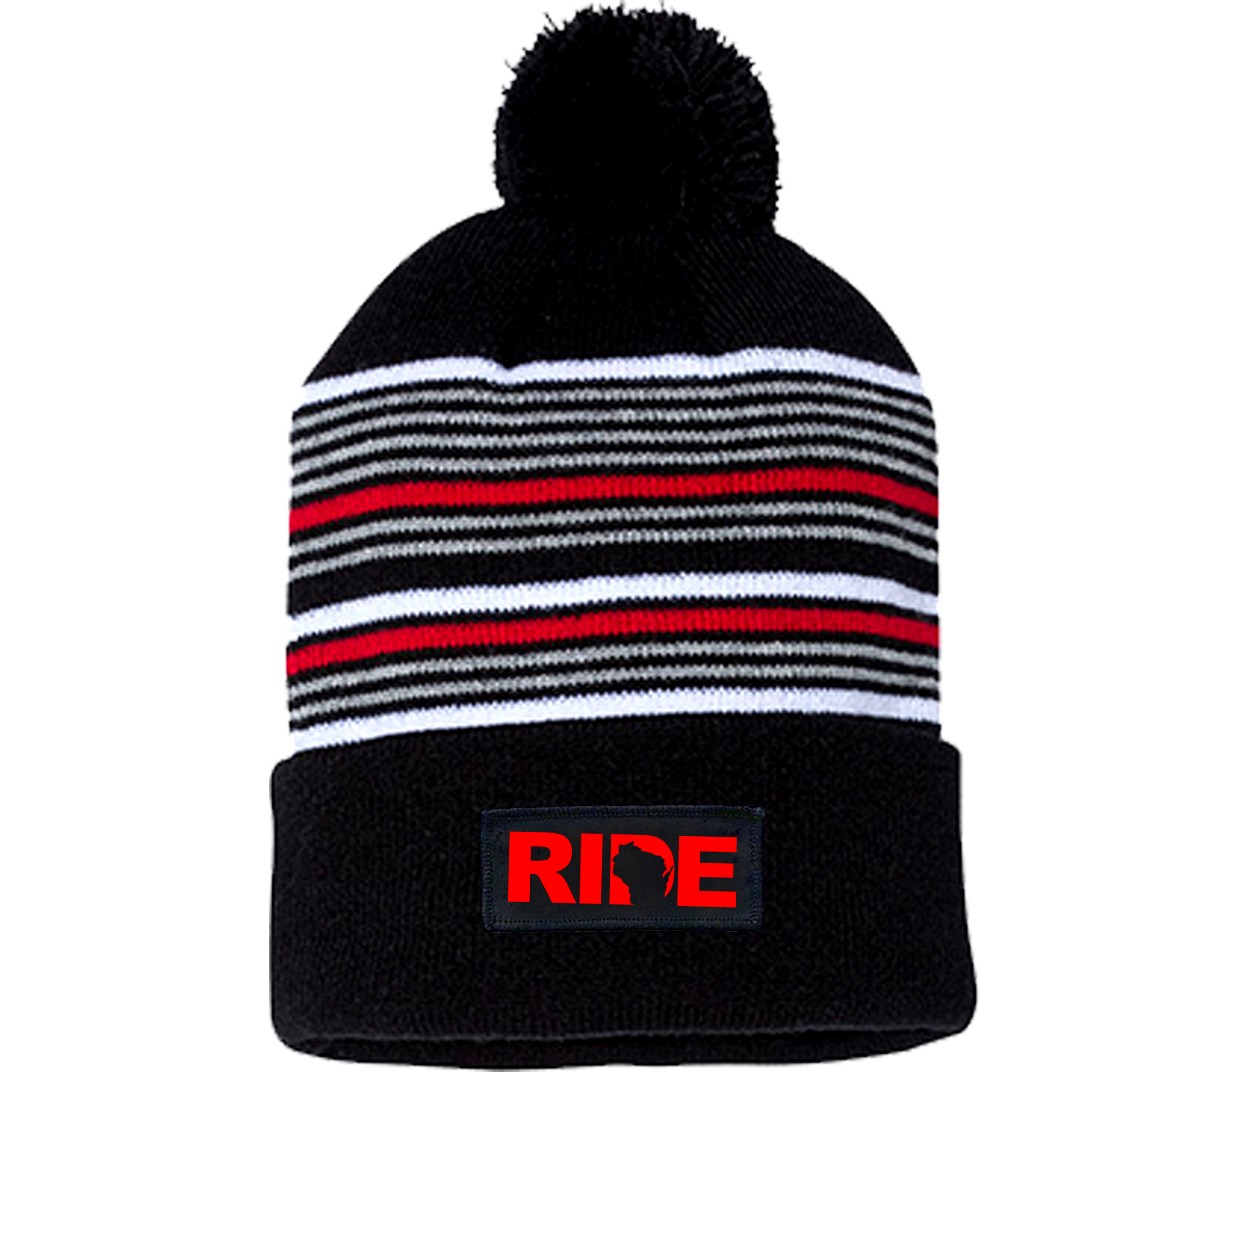 Ride Wisconsin Night Out Woven Patch Roll Up Pom Knit Beanie Black/ White/ Grey/ Red Beanie (Red Logo)